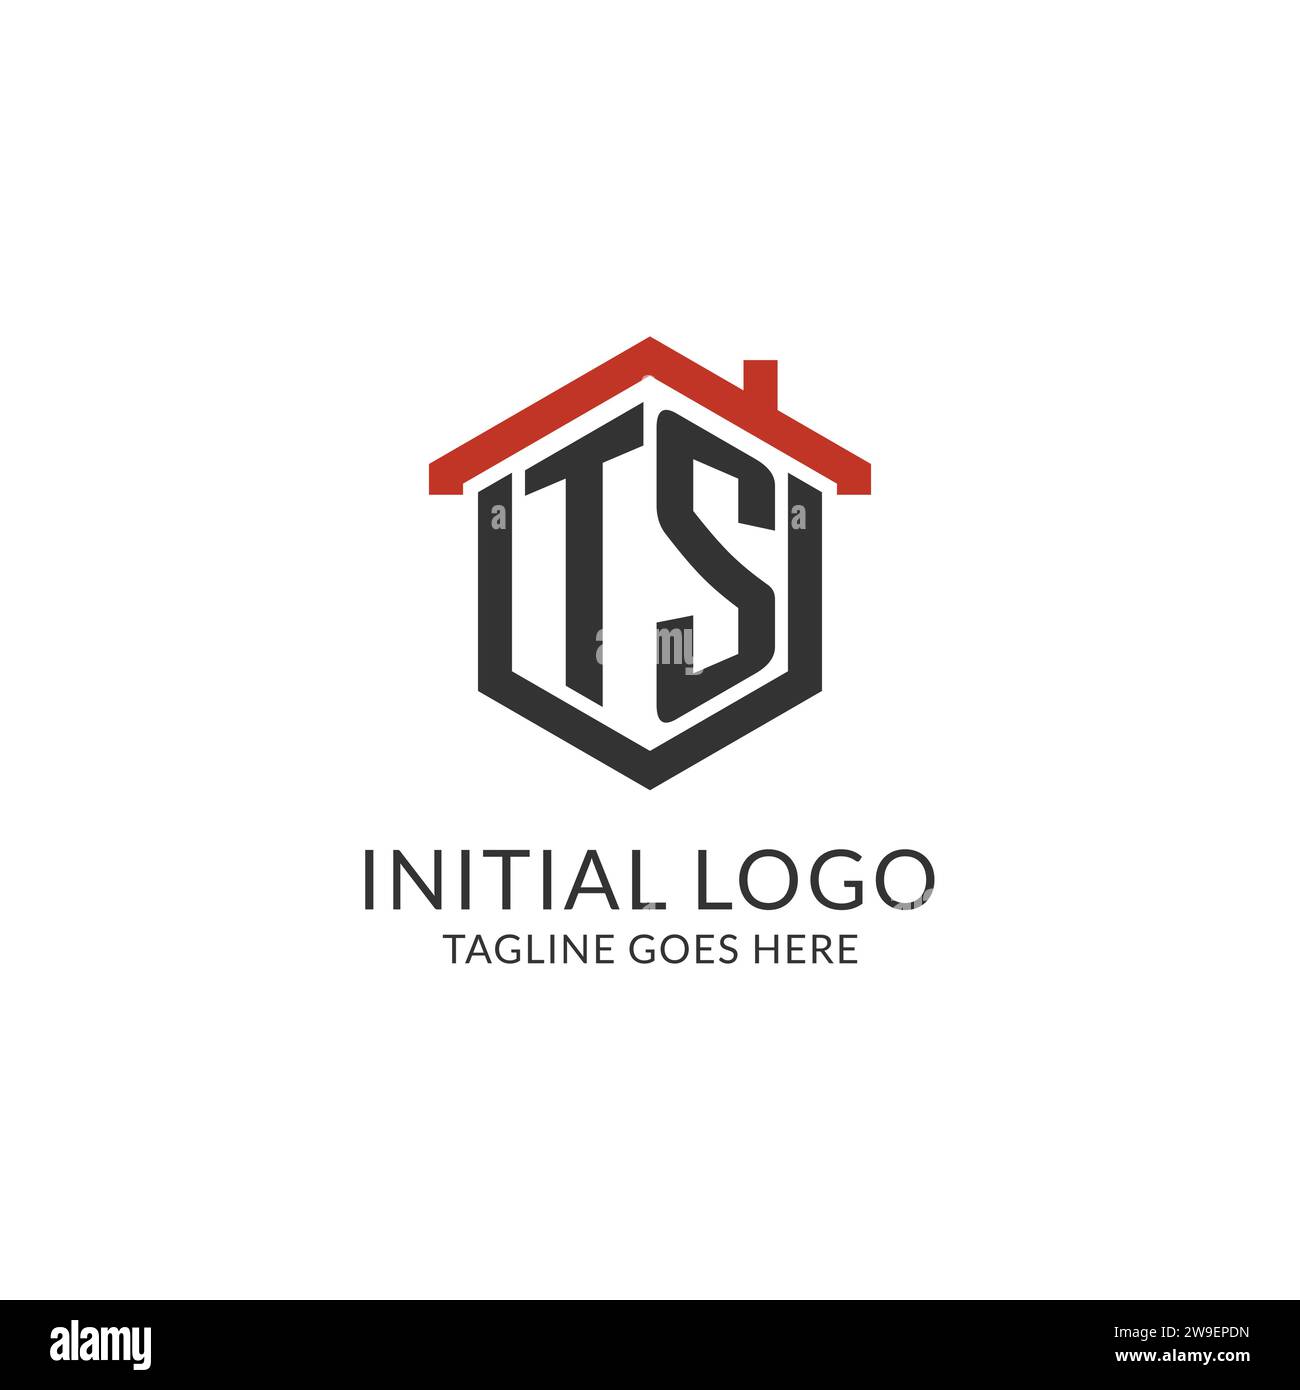 Initial logo TS monogram with home roof hexagon shape design, simple and minimal real estate logo design vector graphic Stock Vector